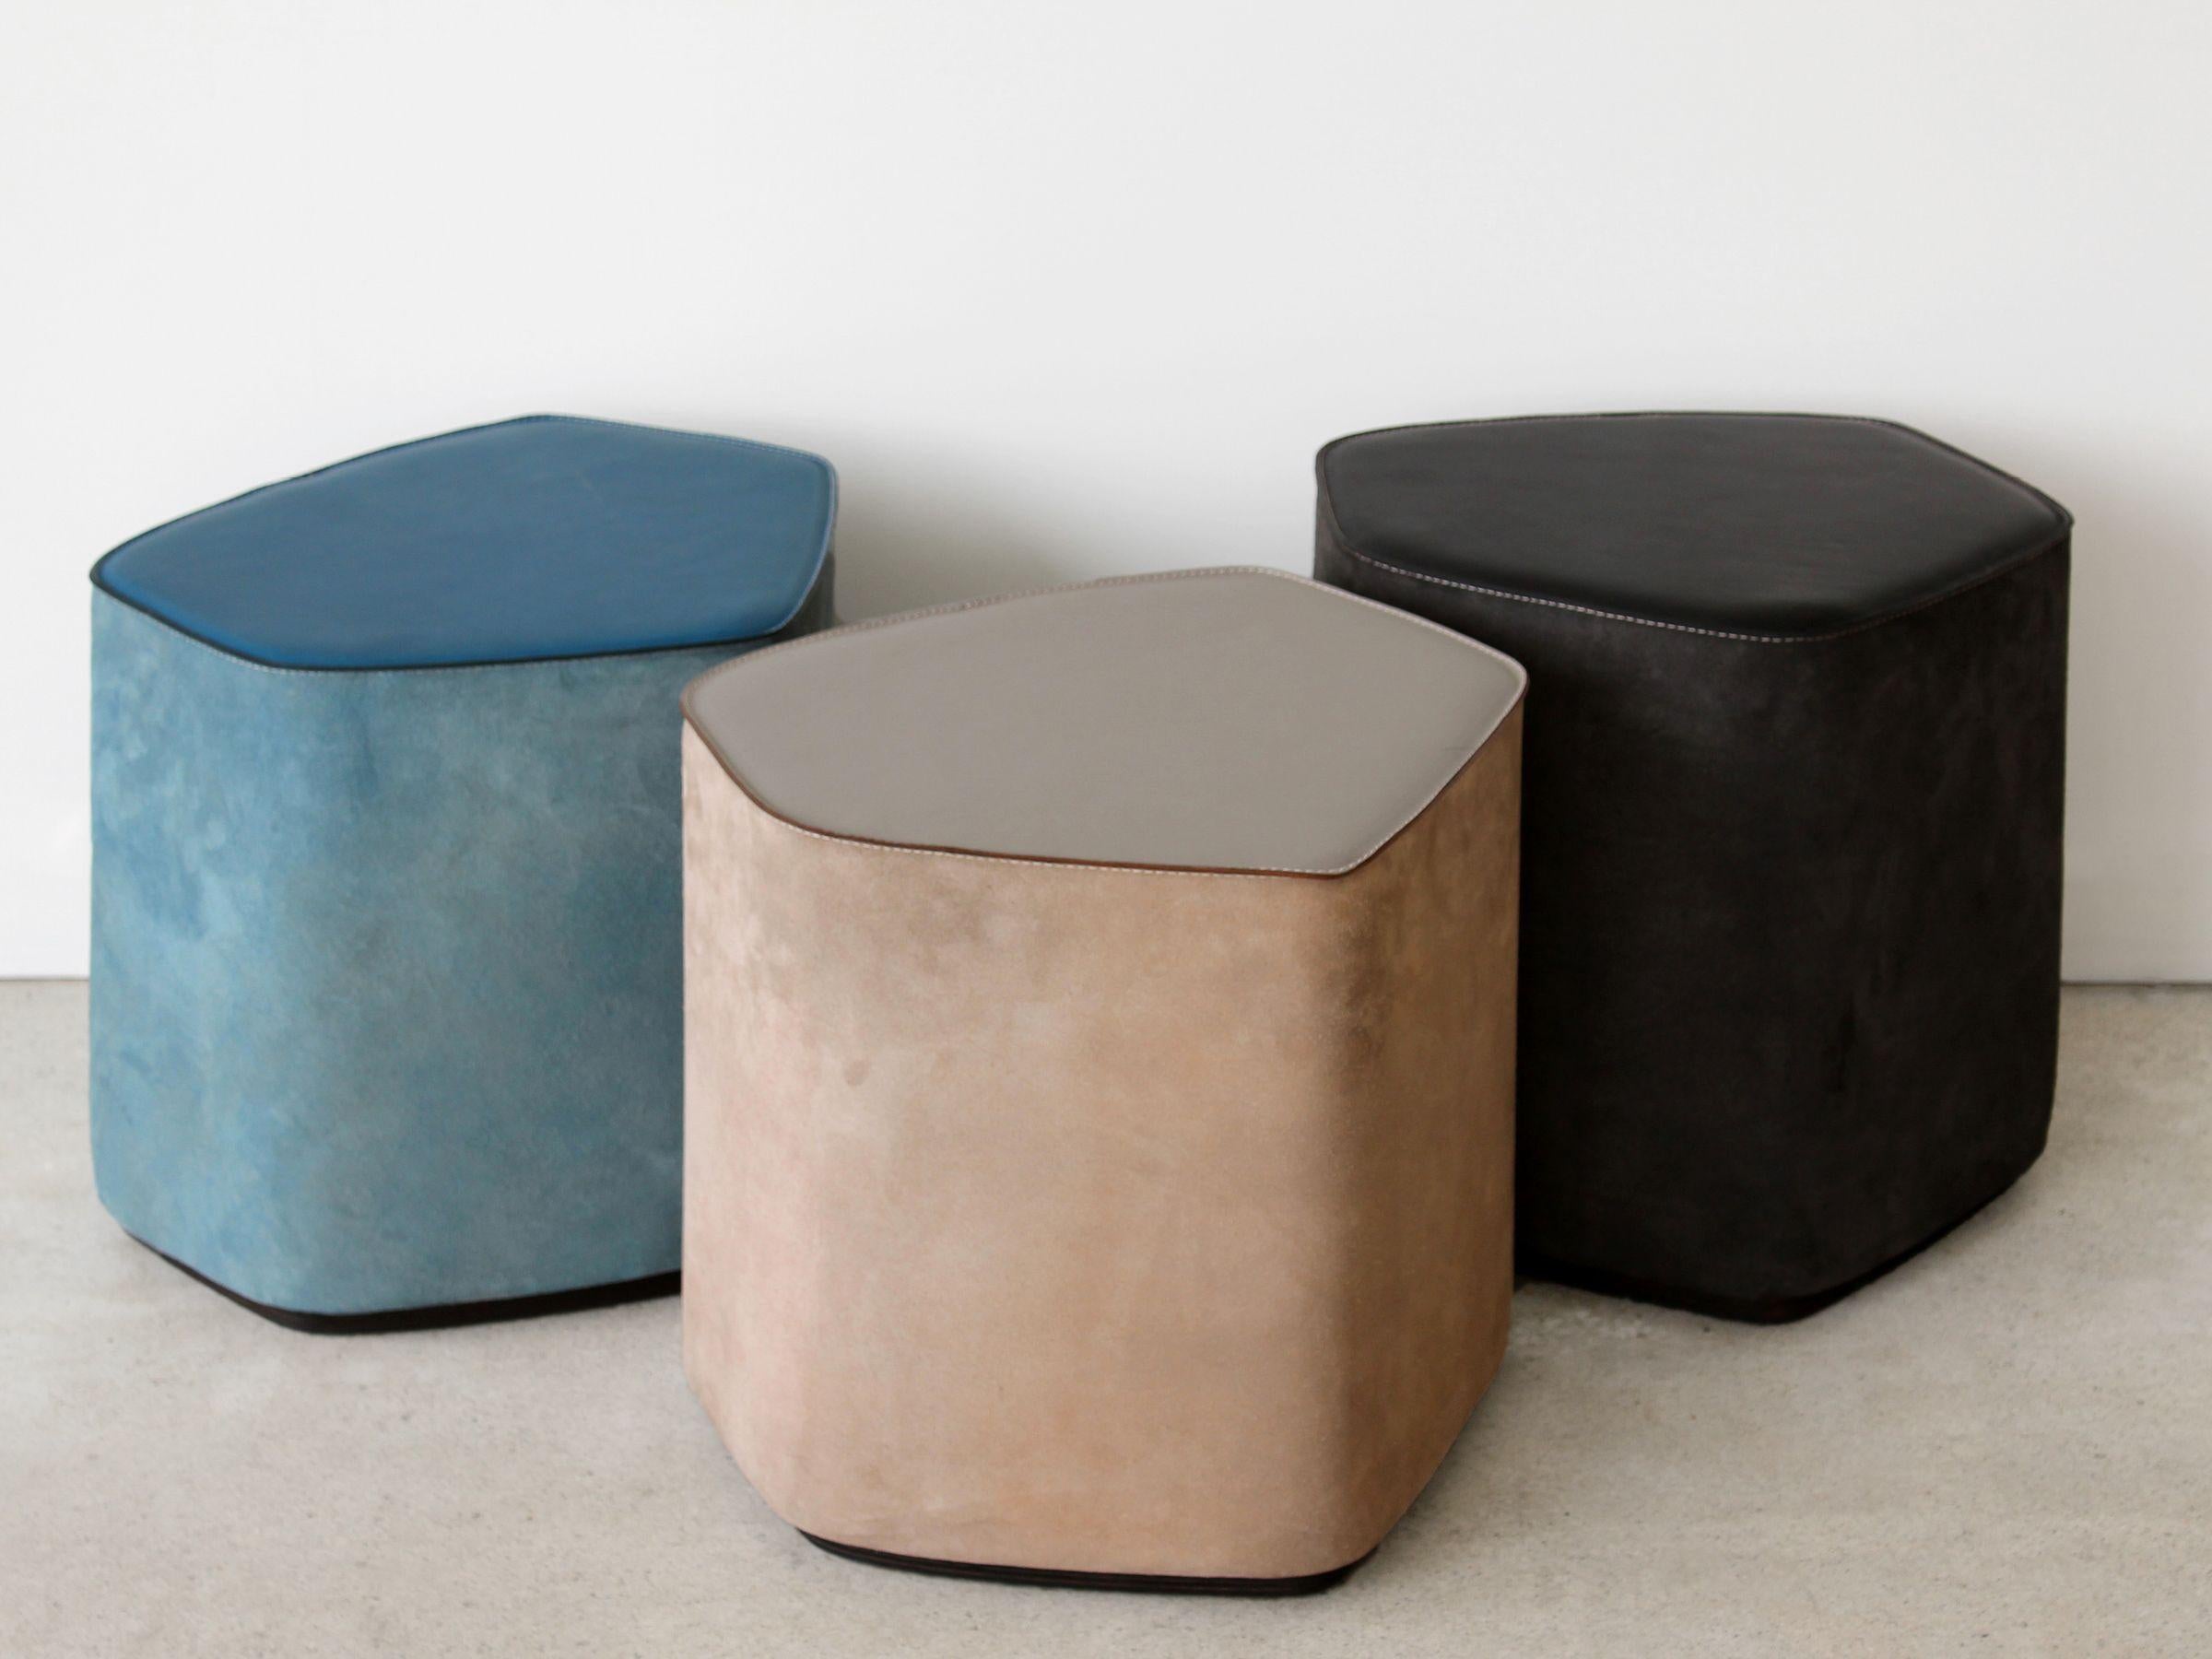 Leather stools by Nestor Perkal.

Measures: Small
W 17.71